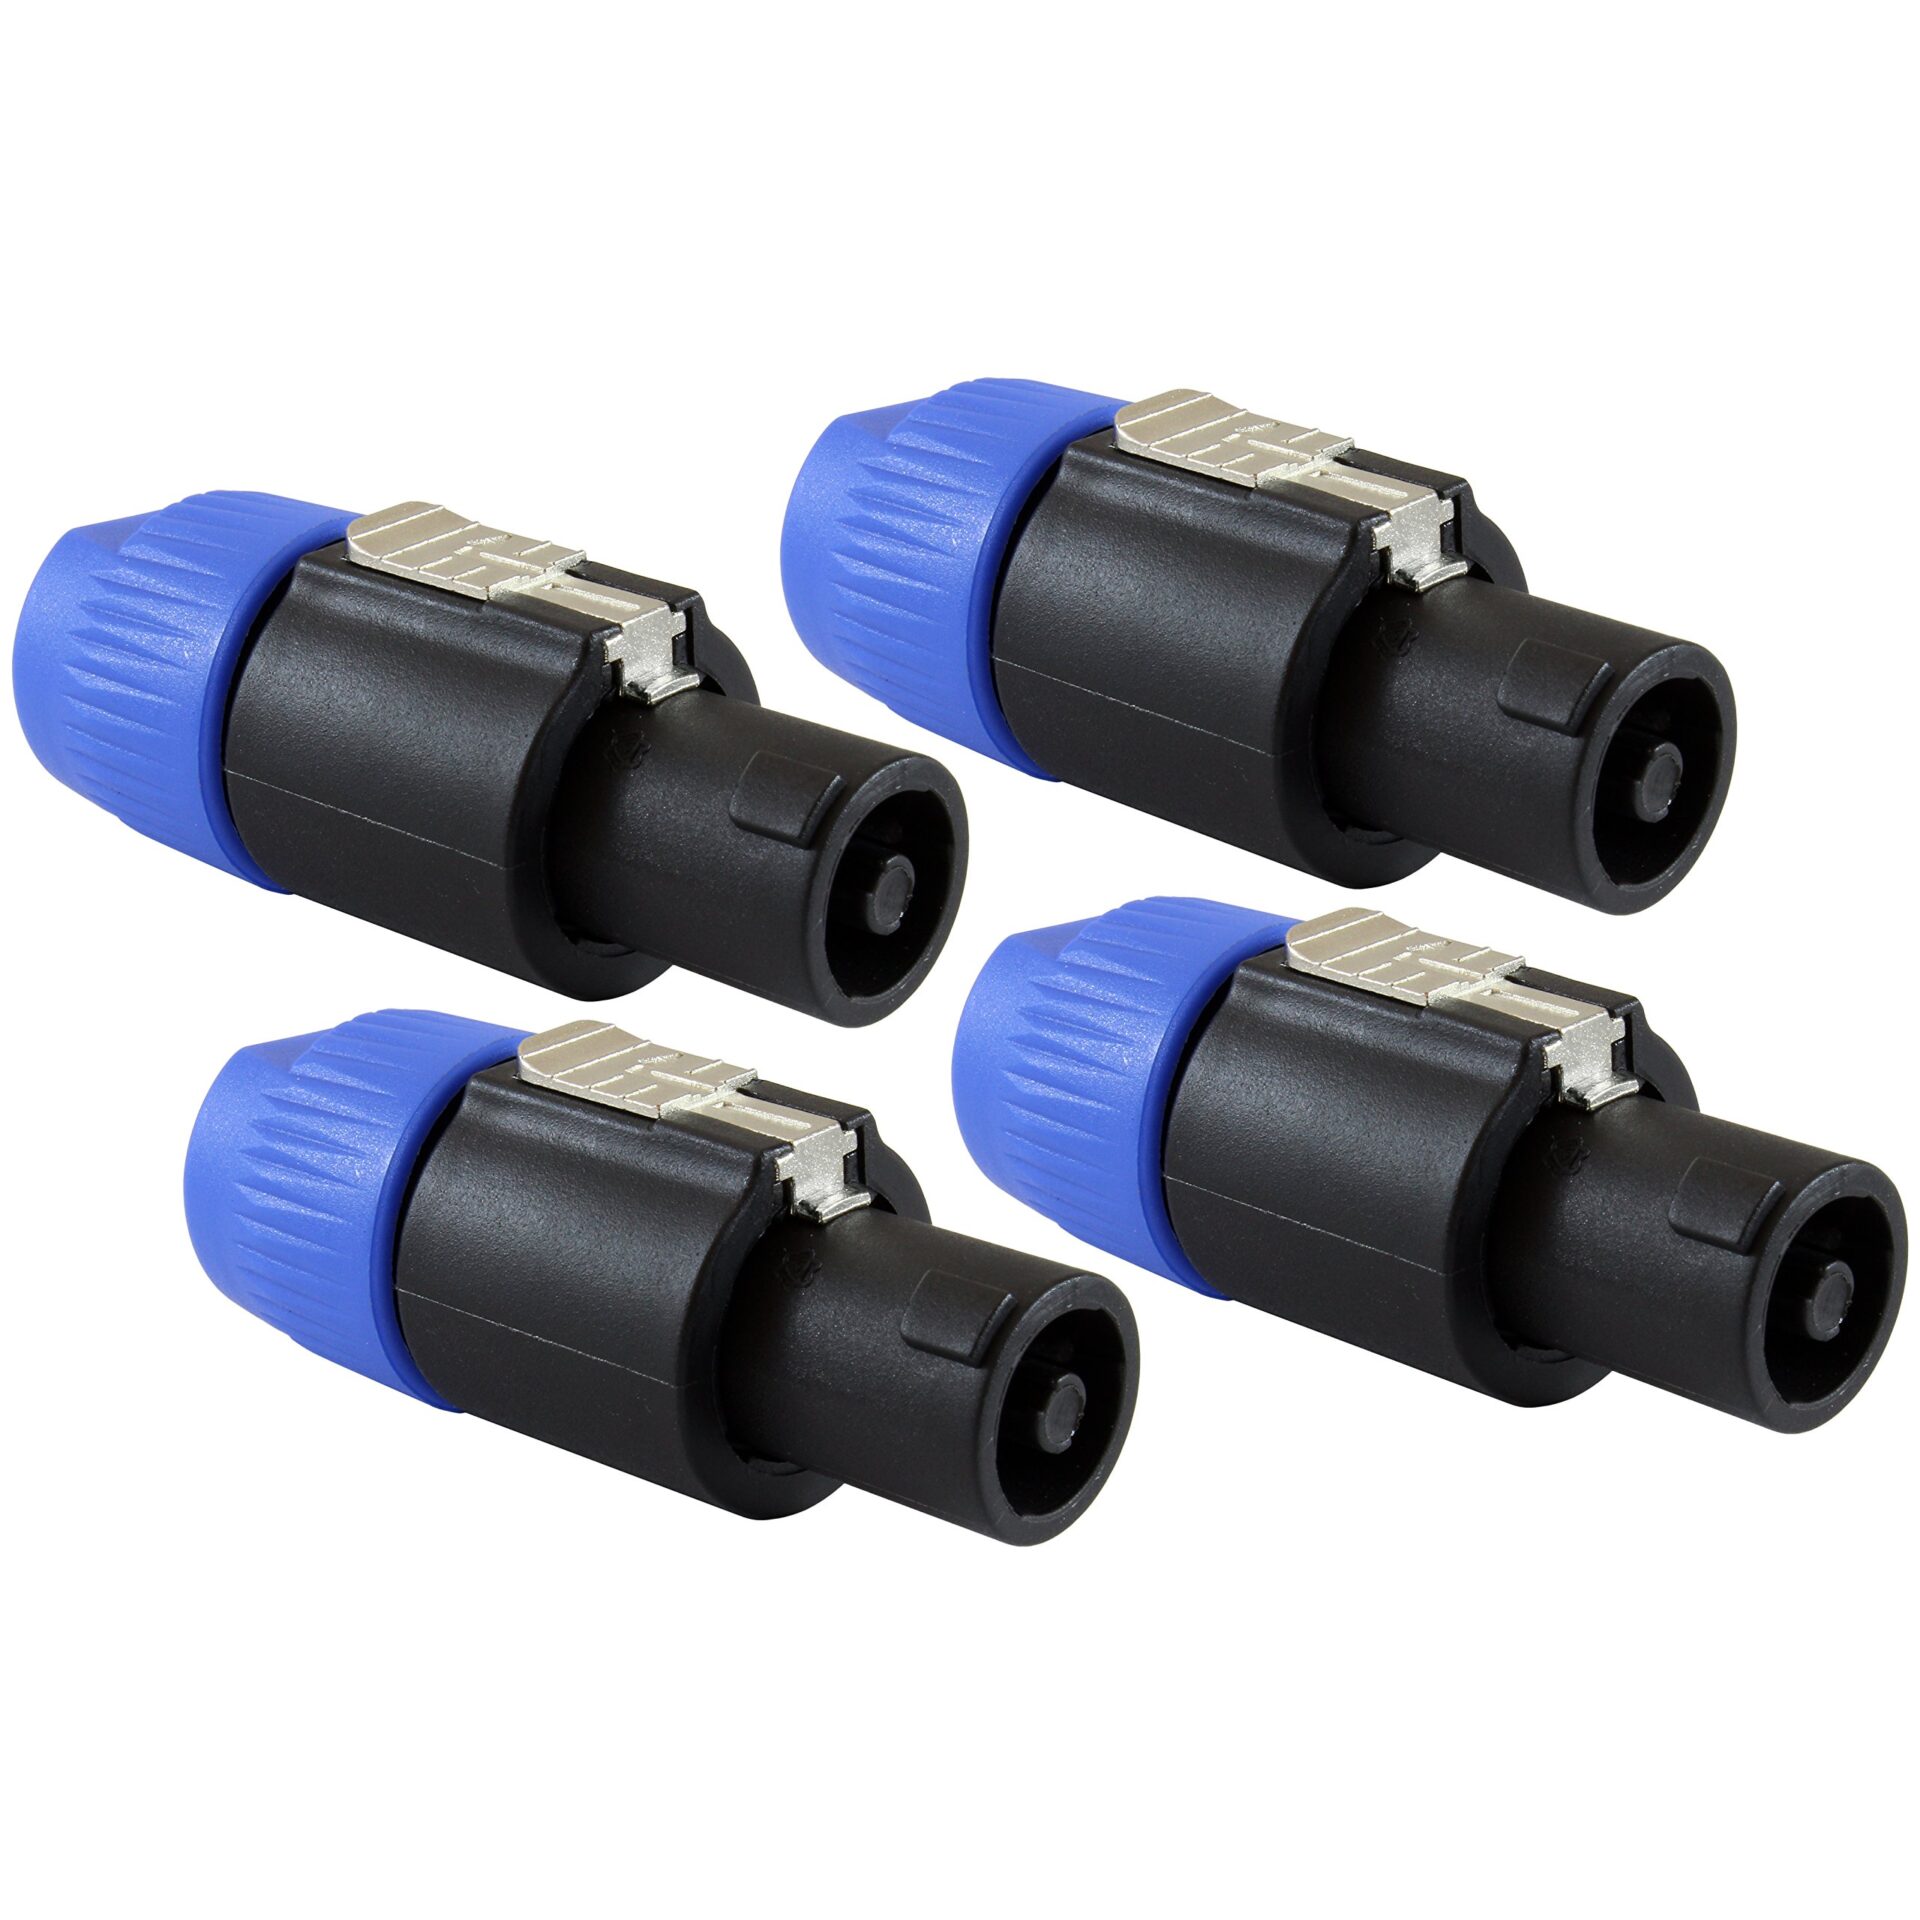 Loudspeaker Connectors Market Overview, Key Vendors, Segment, Growth Opportunities by 2017 to 2032